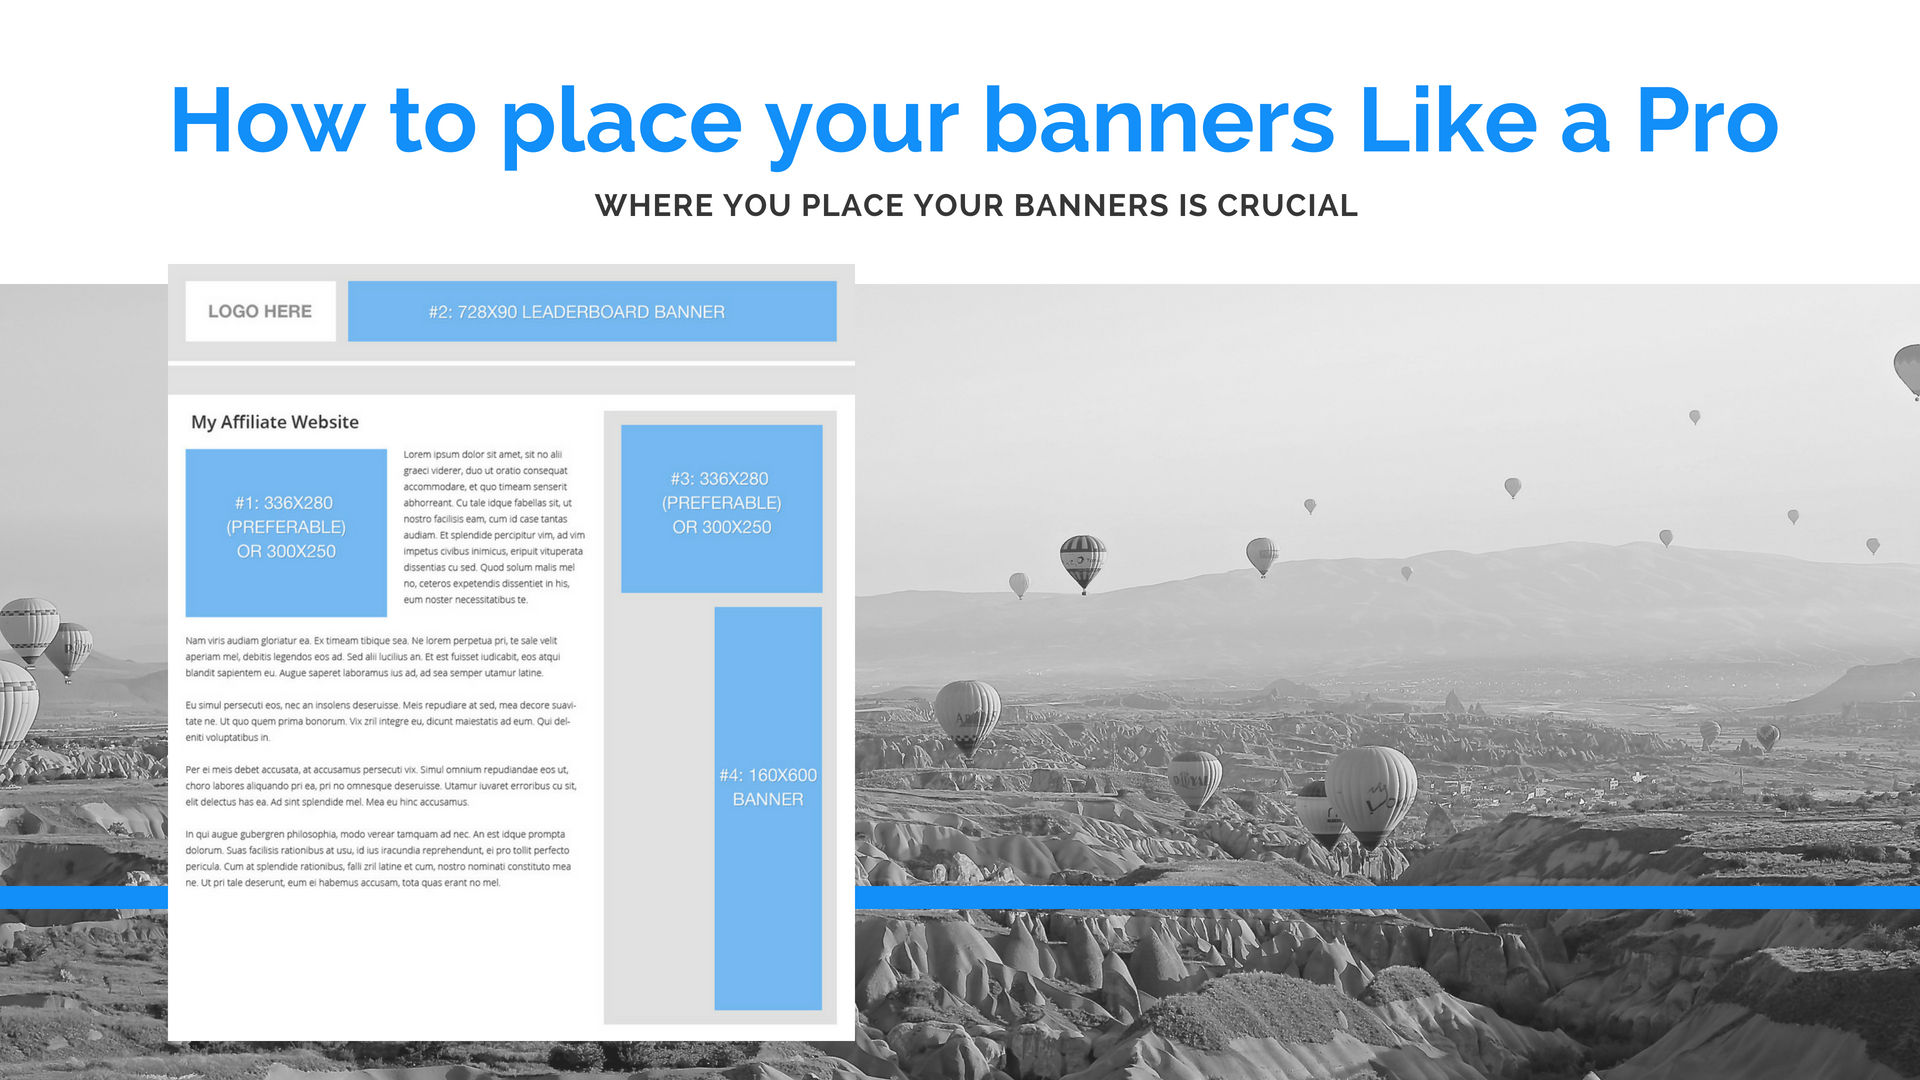 How to place your banners like a pro